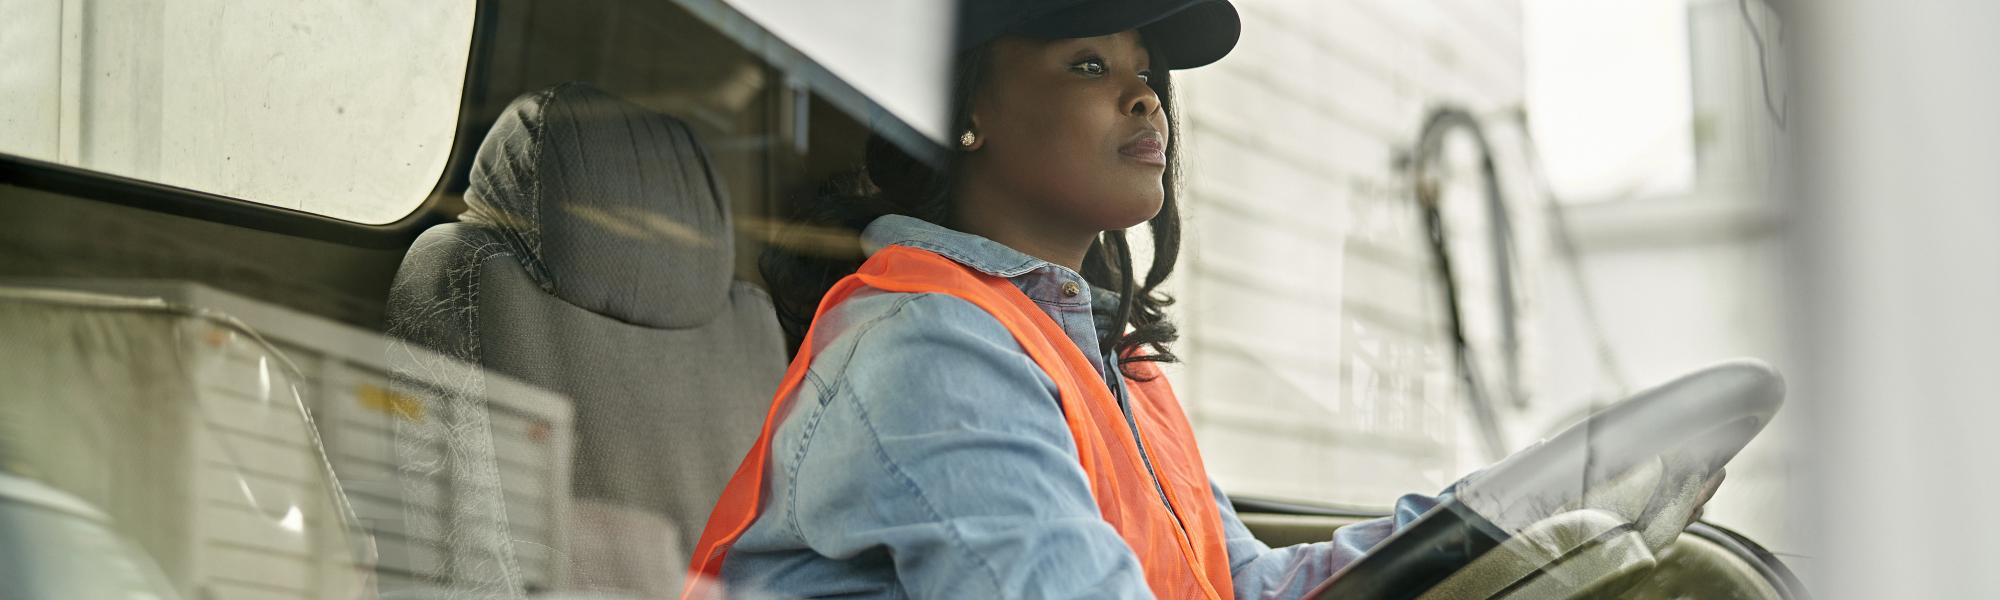 What’s working? Attracting more women and young people to trucking